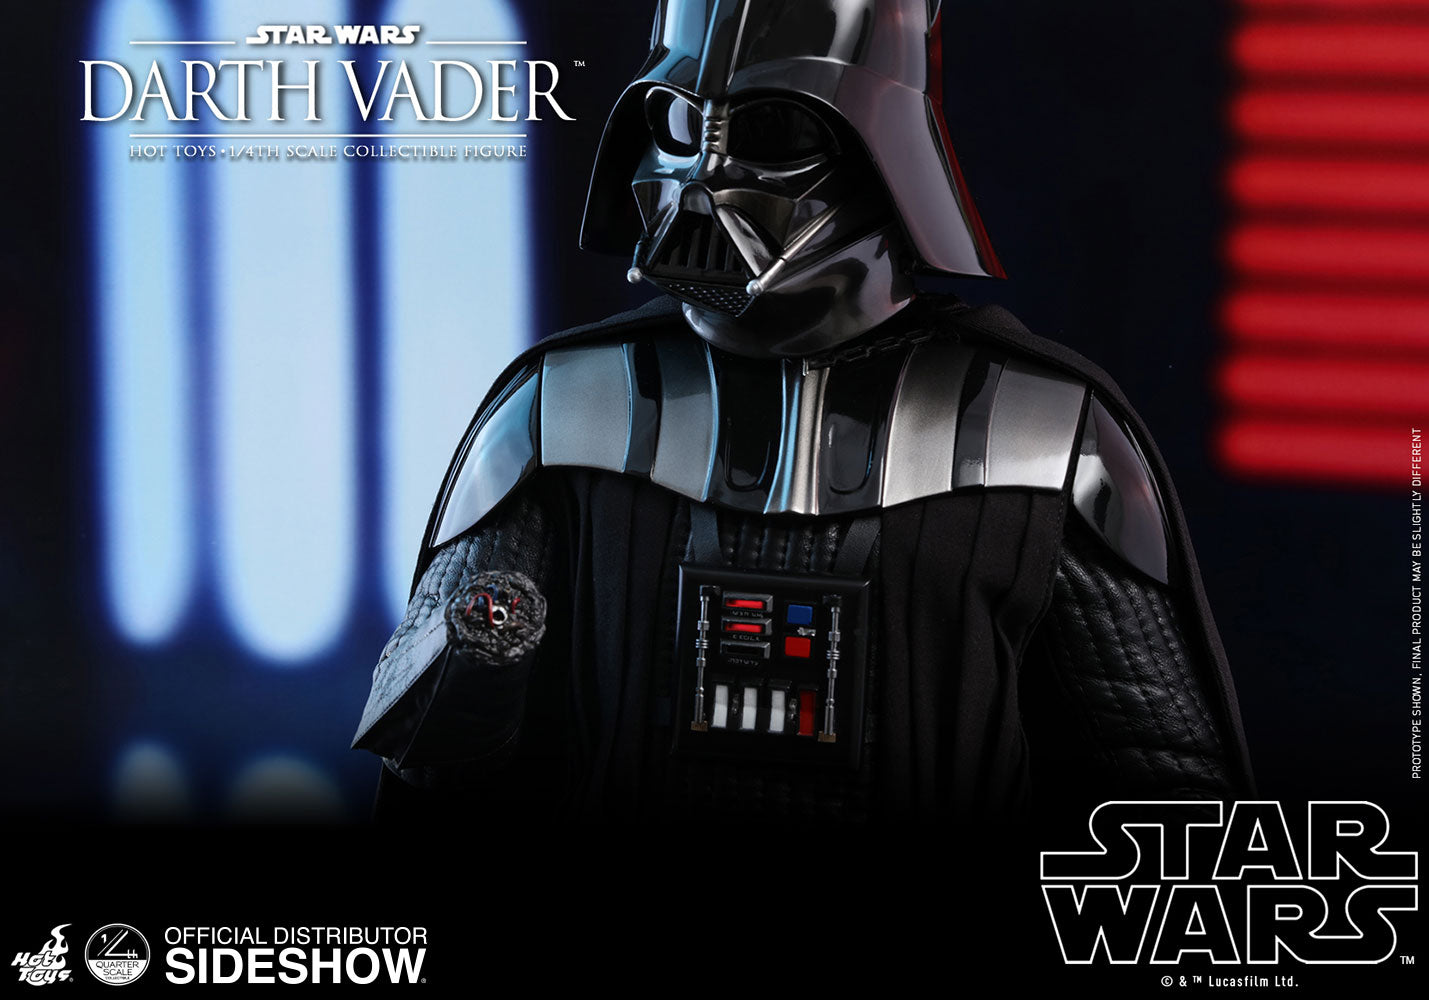 Hot Toys - QS013 - Star Wars: Return of the Jedi - Darth Vader (1/4 Scale) - Marvelous Toys